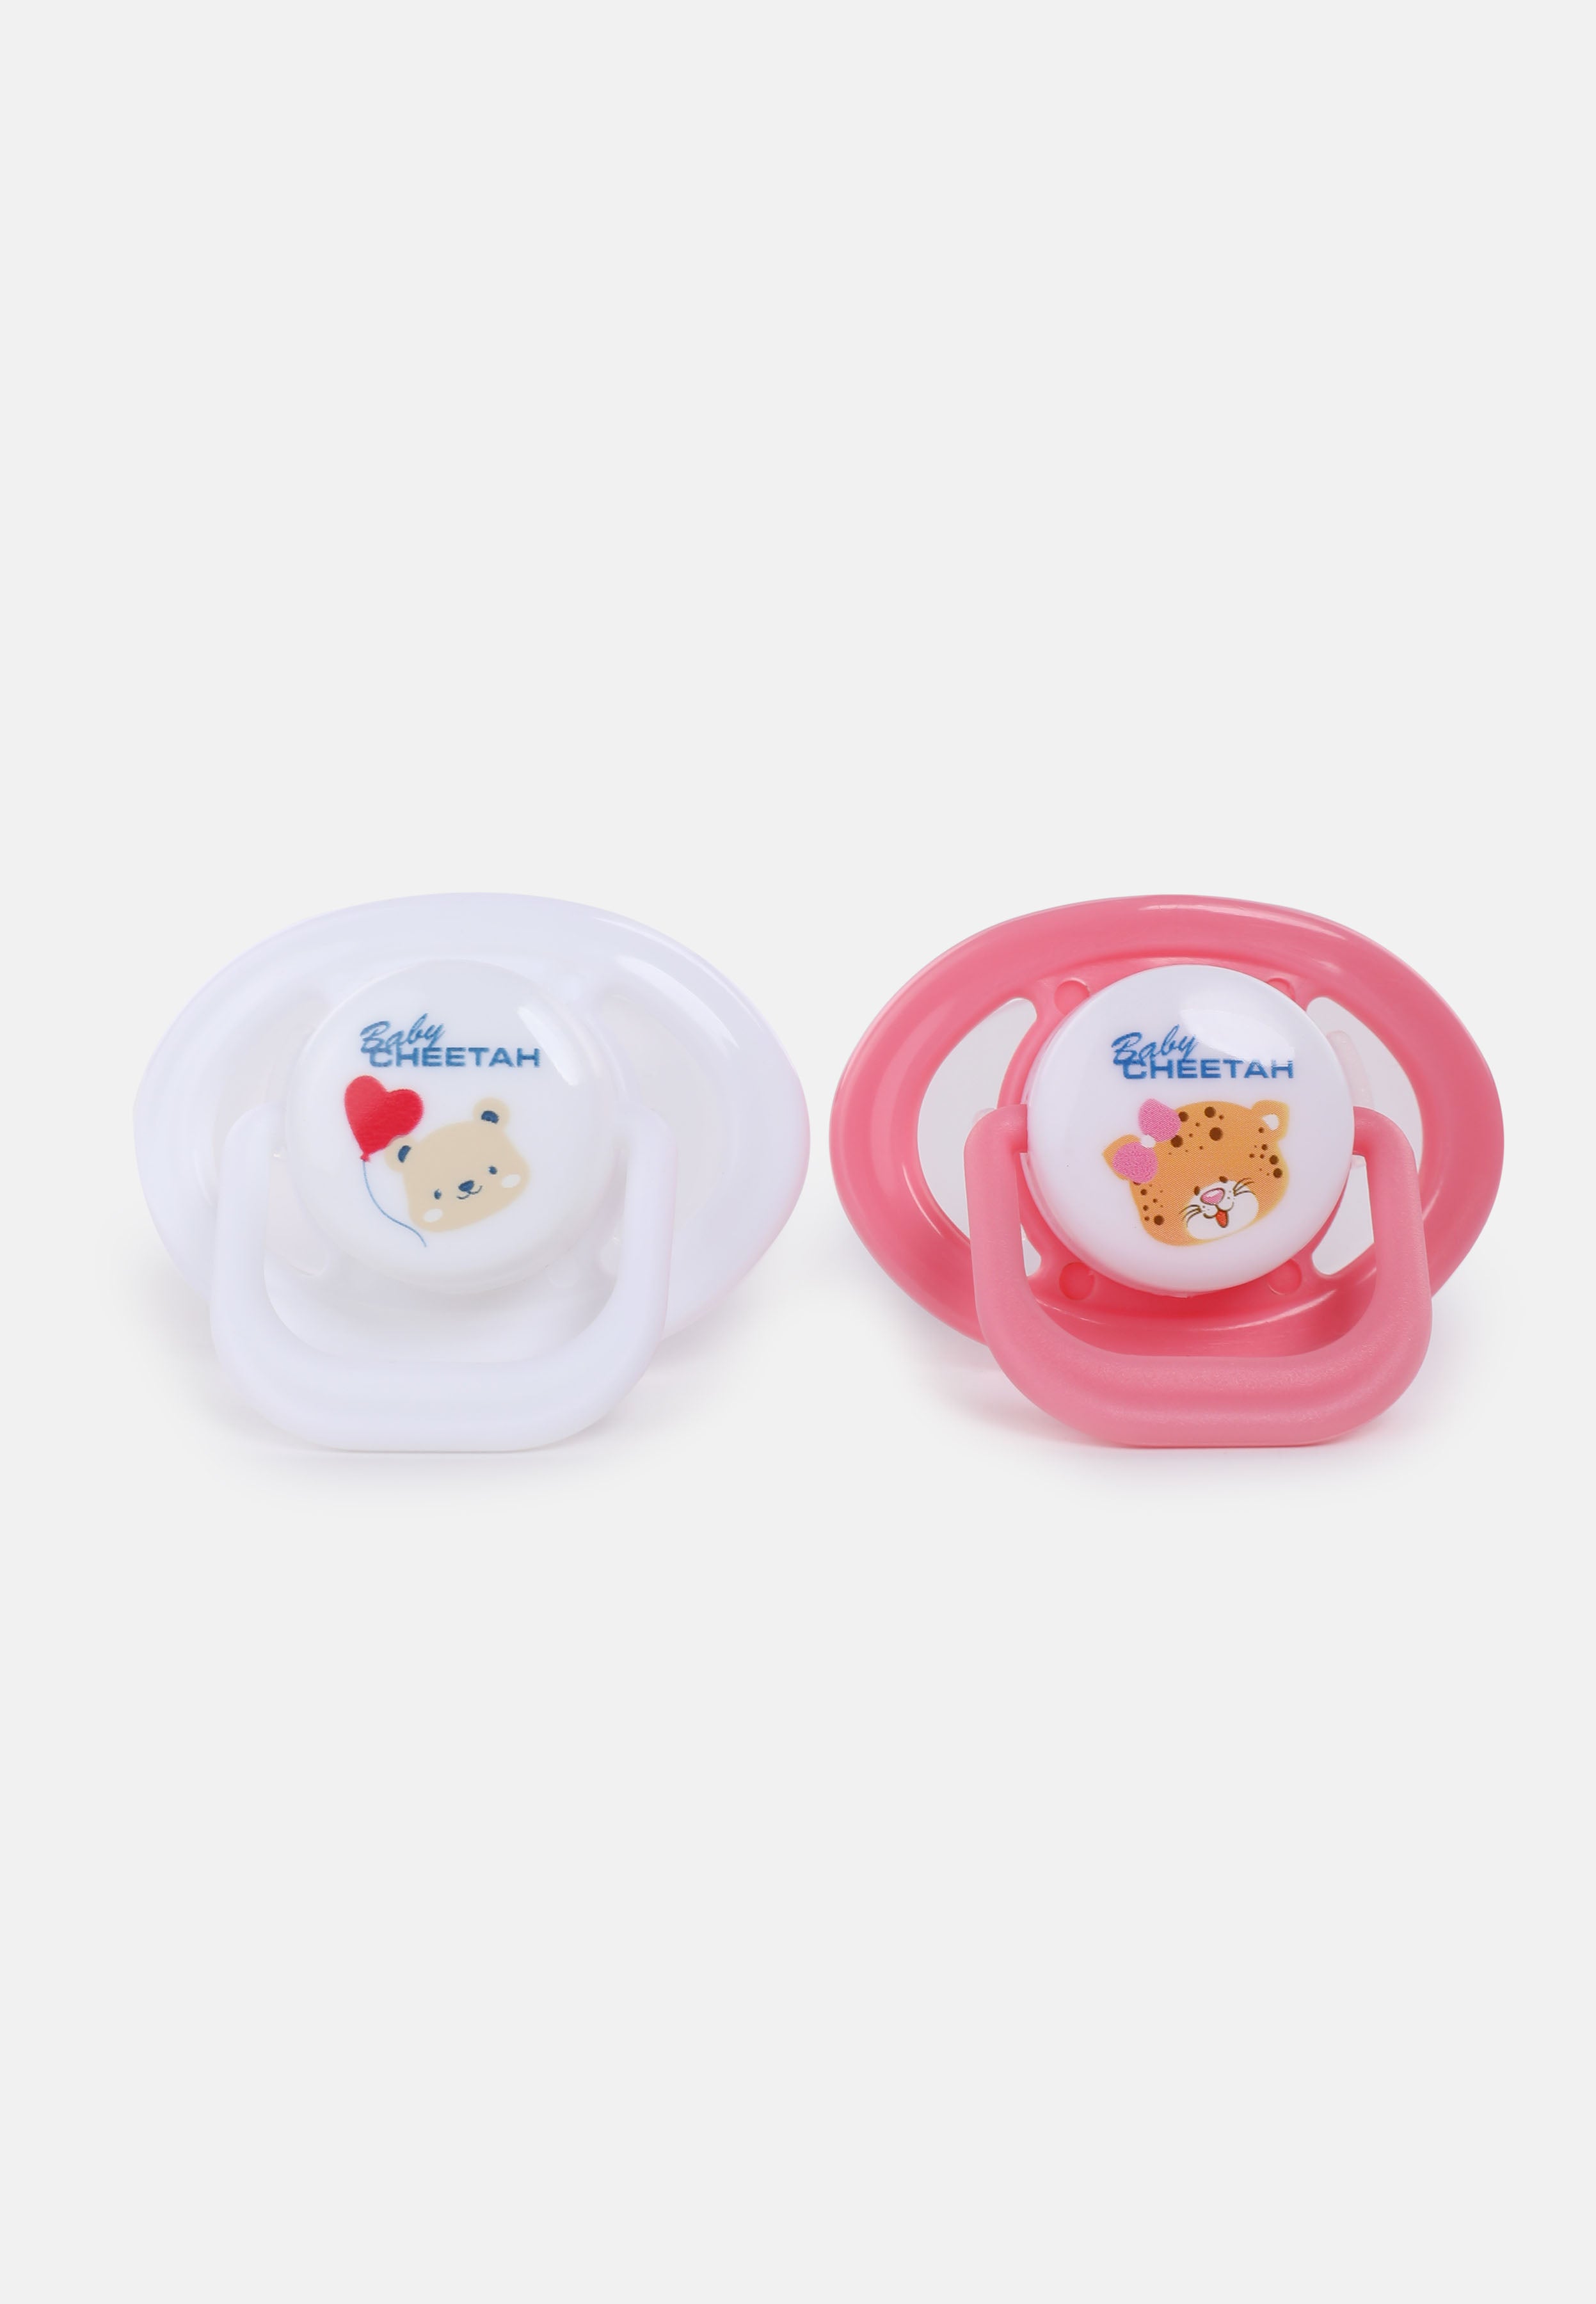 Baby Cheetah Soother with Case (2 IN 1) - Cherry Teats (6M+) - CBB-ST21082